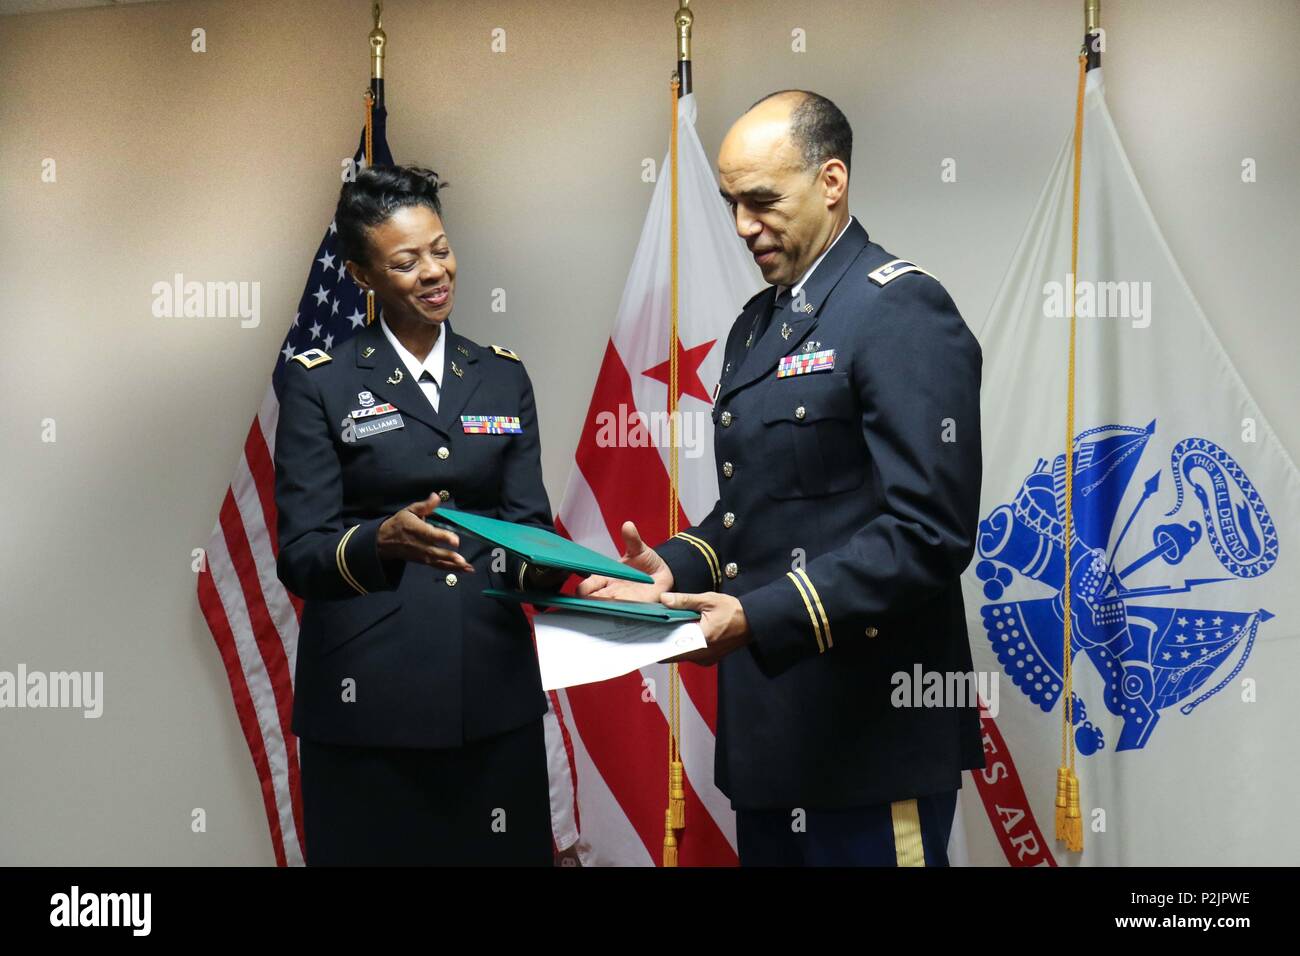 WASHINGTON-Lt. Col. Thaddeus A. Hoffmeister, defense attorney, 352nd Judge  Advocate General Team Support, District of Columbia National Guard receives  an Army Achievement Medal and the Army Commendation Medal from his former  commander, (